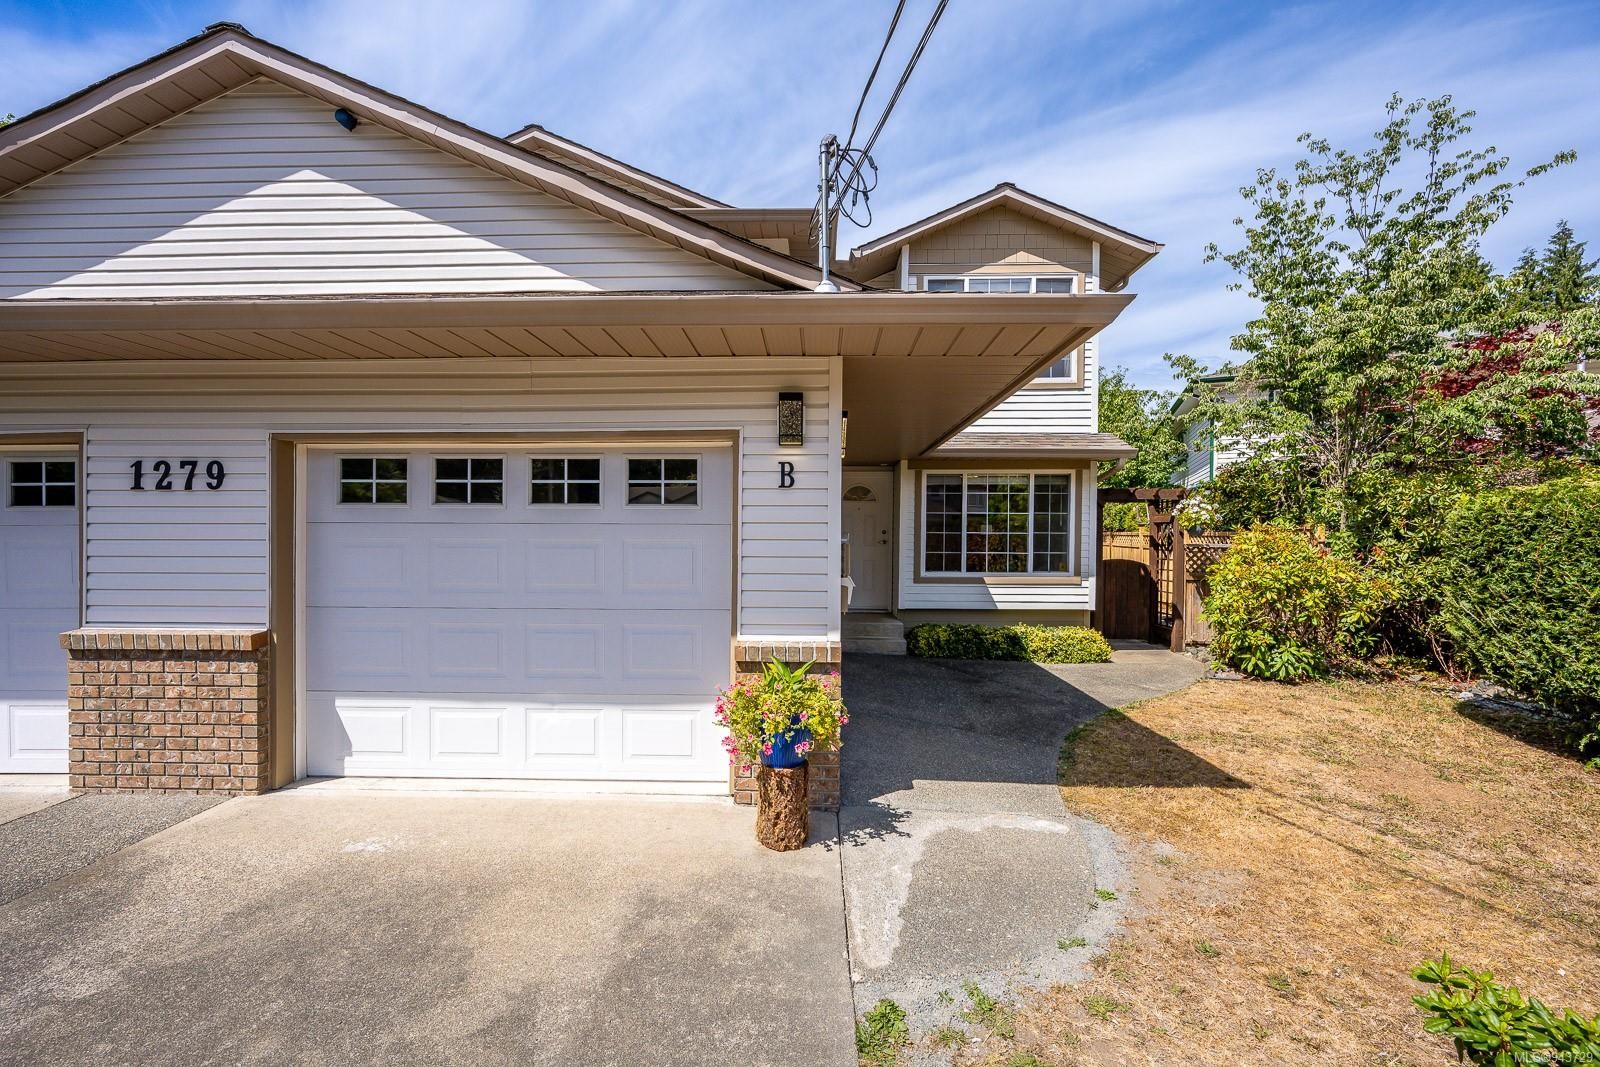 Open House. Open House on Saturday, September 23, 2023 10:00AM - 11:00AM
Please join us this Saturday from 10 to 11 AM for an Open House to tour this charming half duplex.